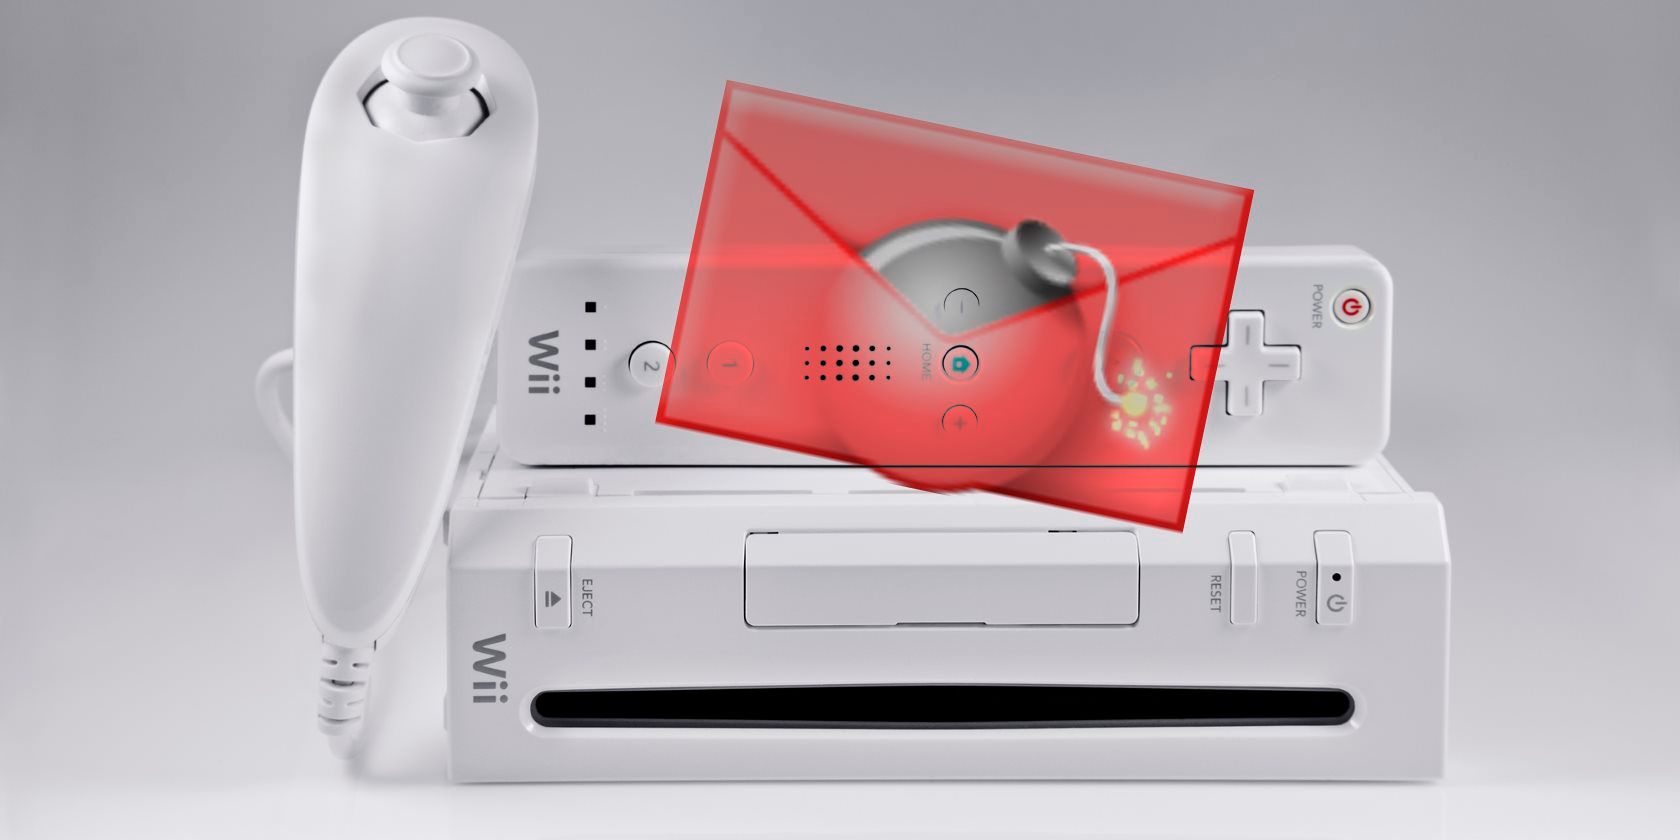 vloeistof programma Infecteren How to Install Homebrew on a Nintendo Wii Using LetterBomb